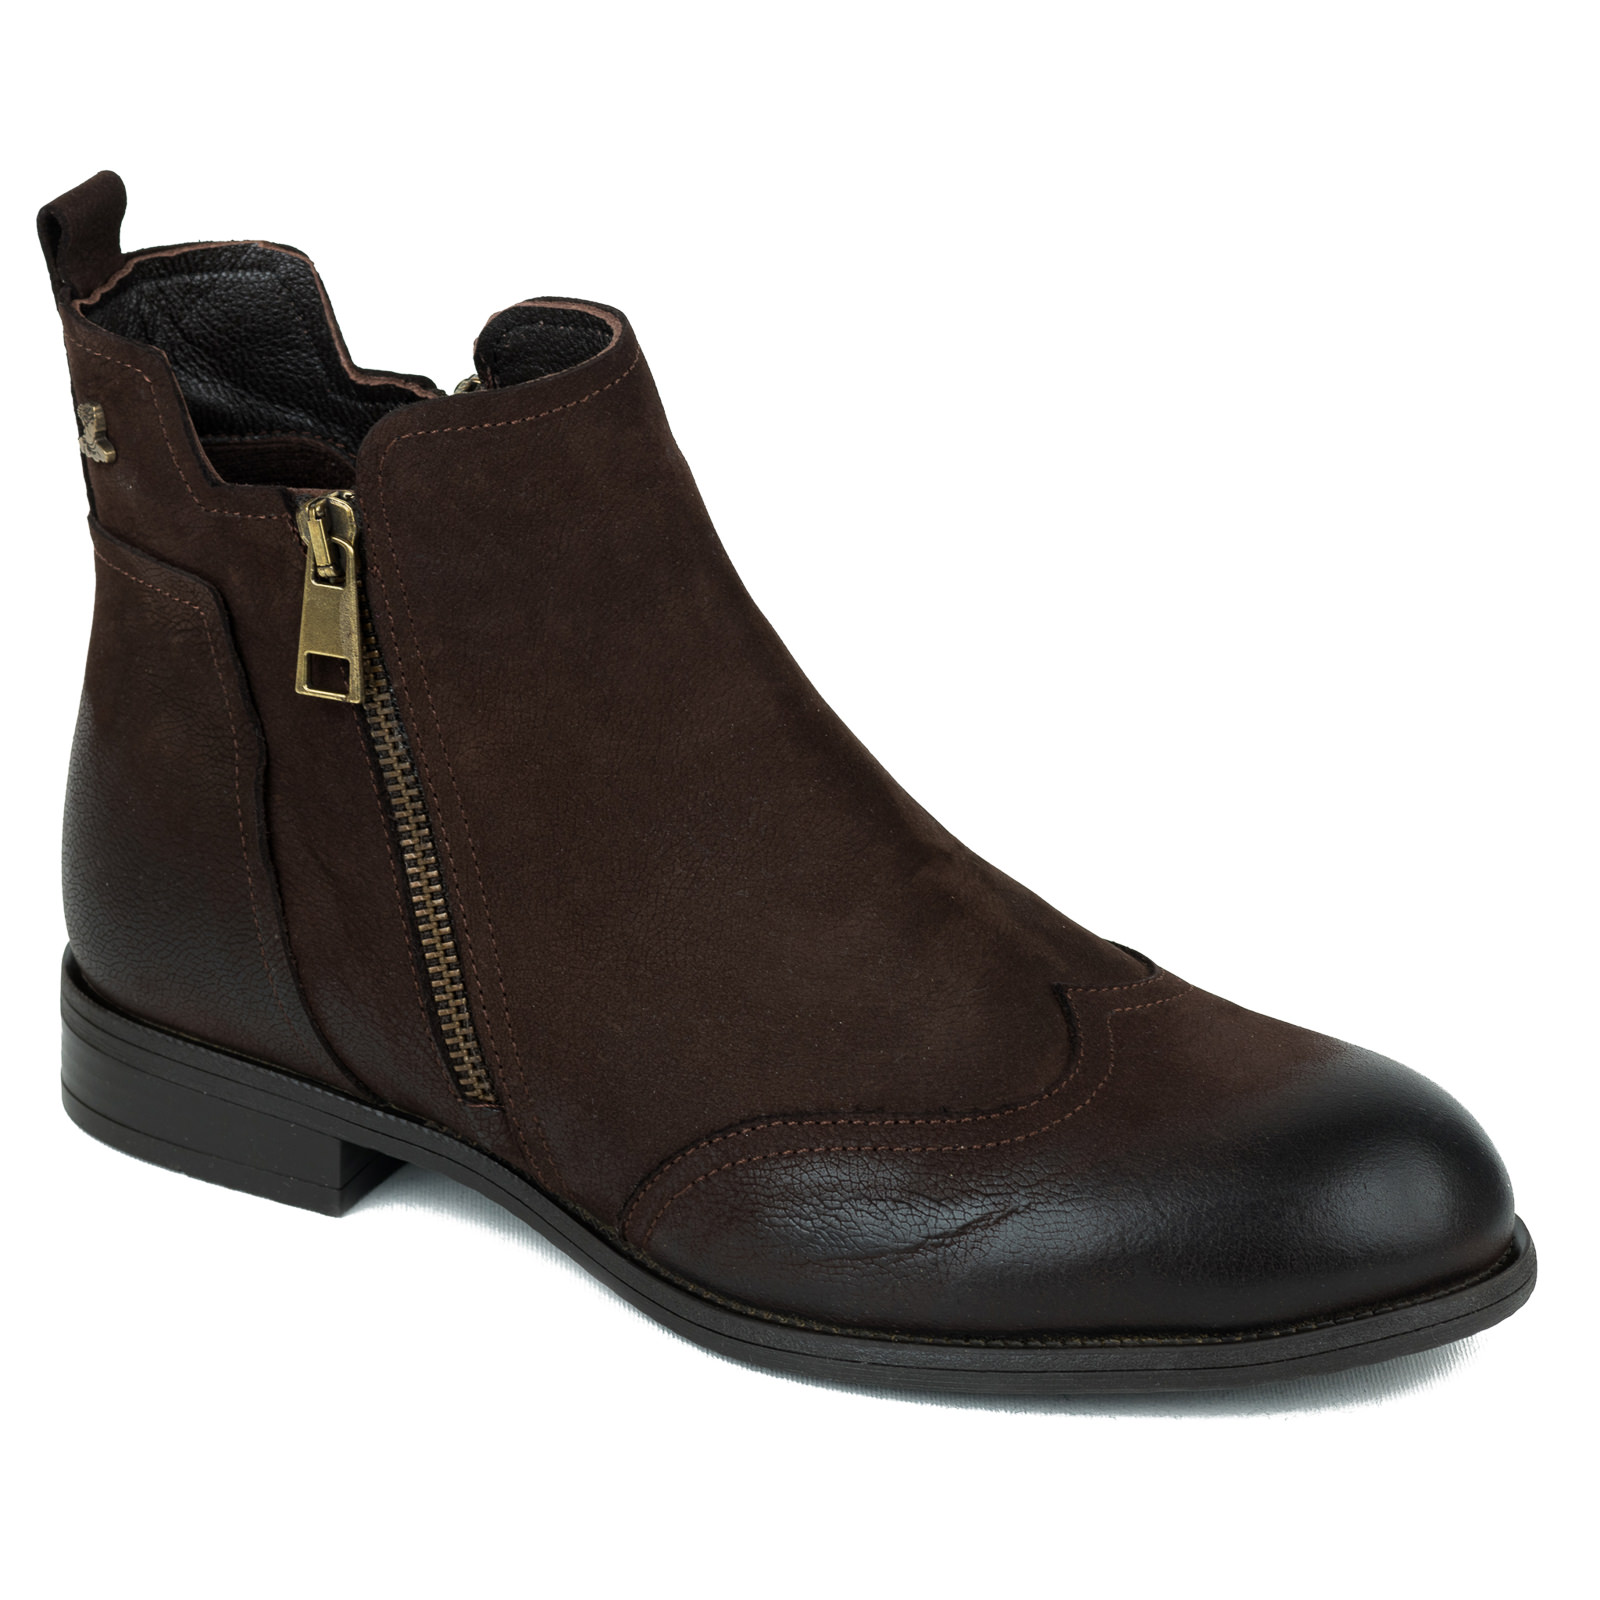 Leather ankle boots B442 - DARK BROWN